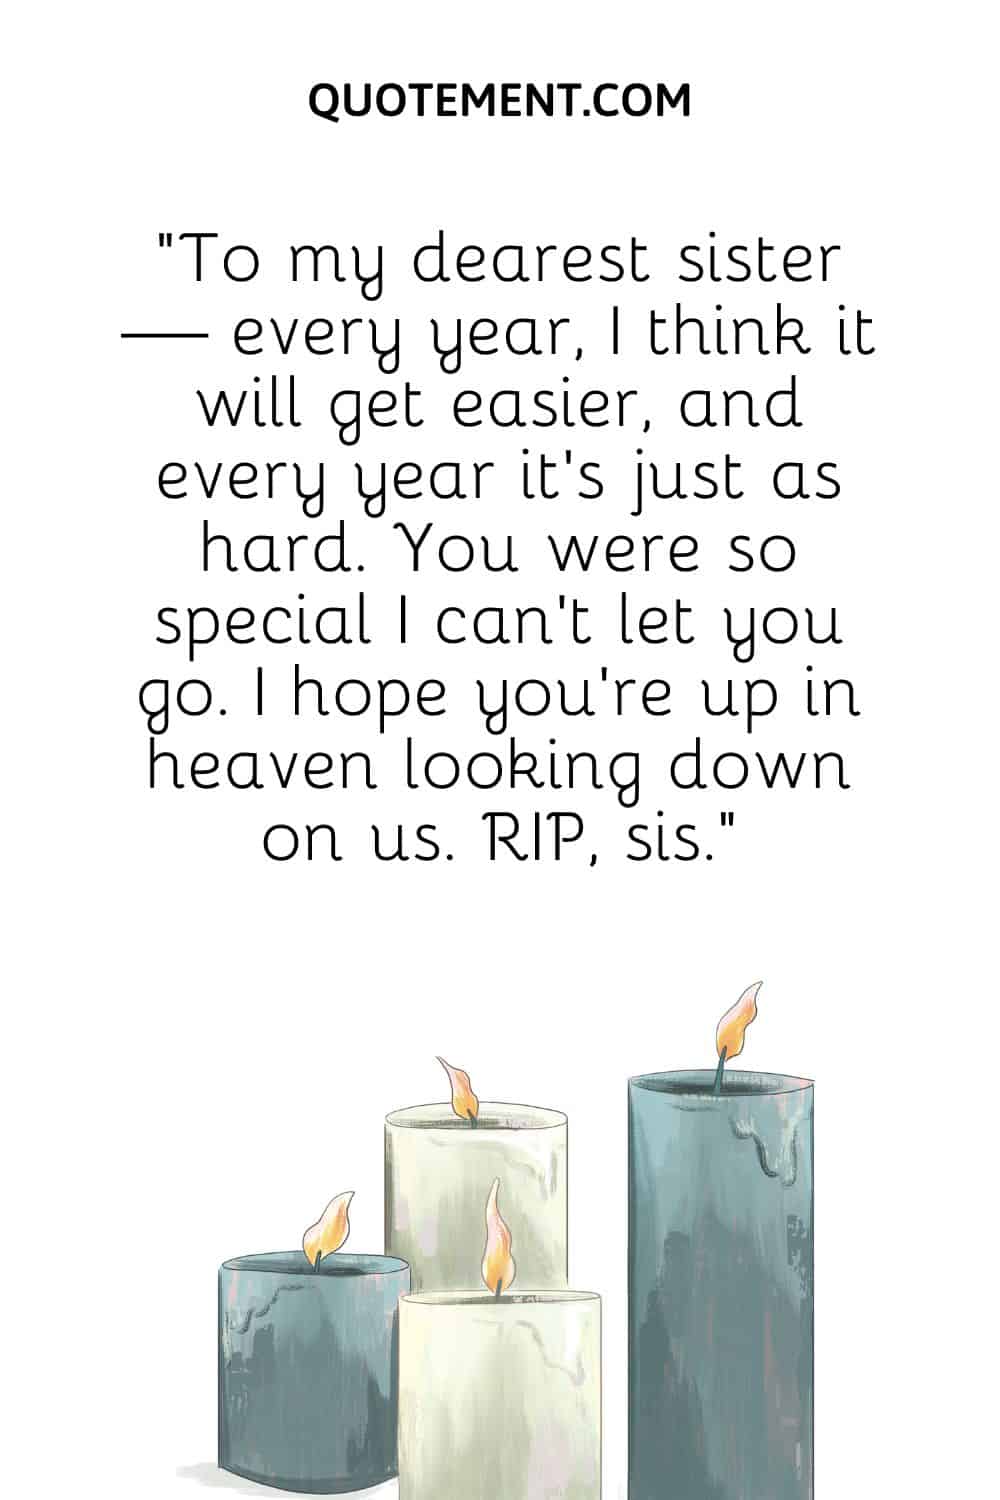 “To my dearest sister — every year, I think it will get easier, and every year it’s just as hard. You were so special I can’t let you go. I hope you’re up in heaven looking down on us. RIP, sis.”